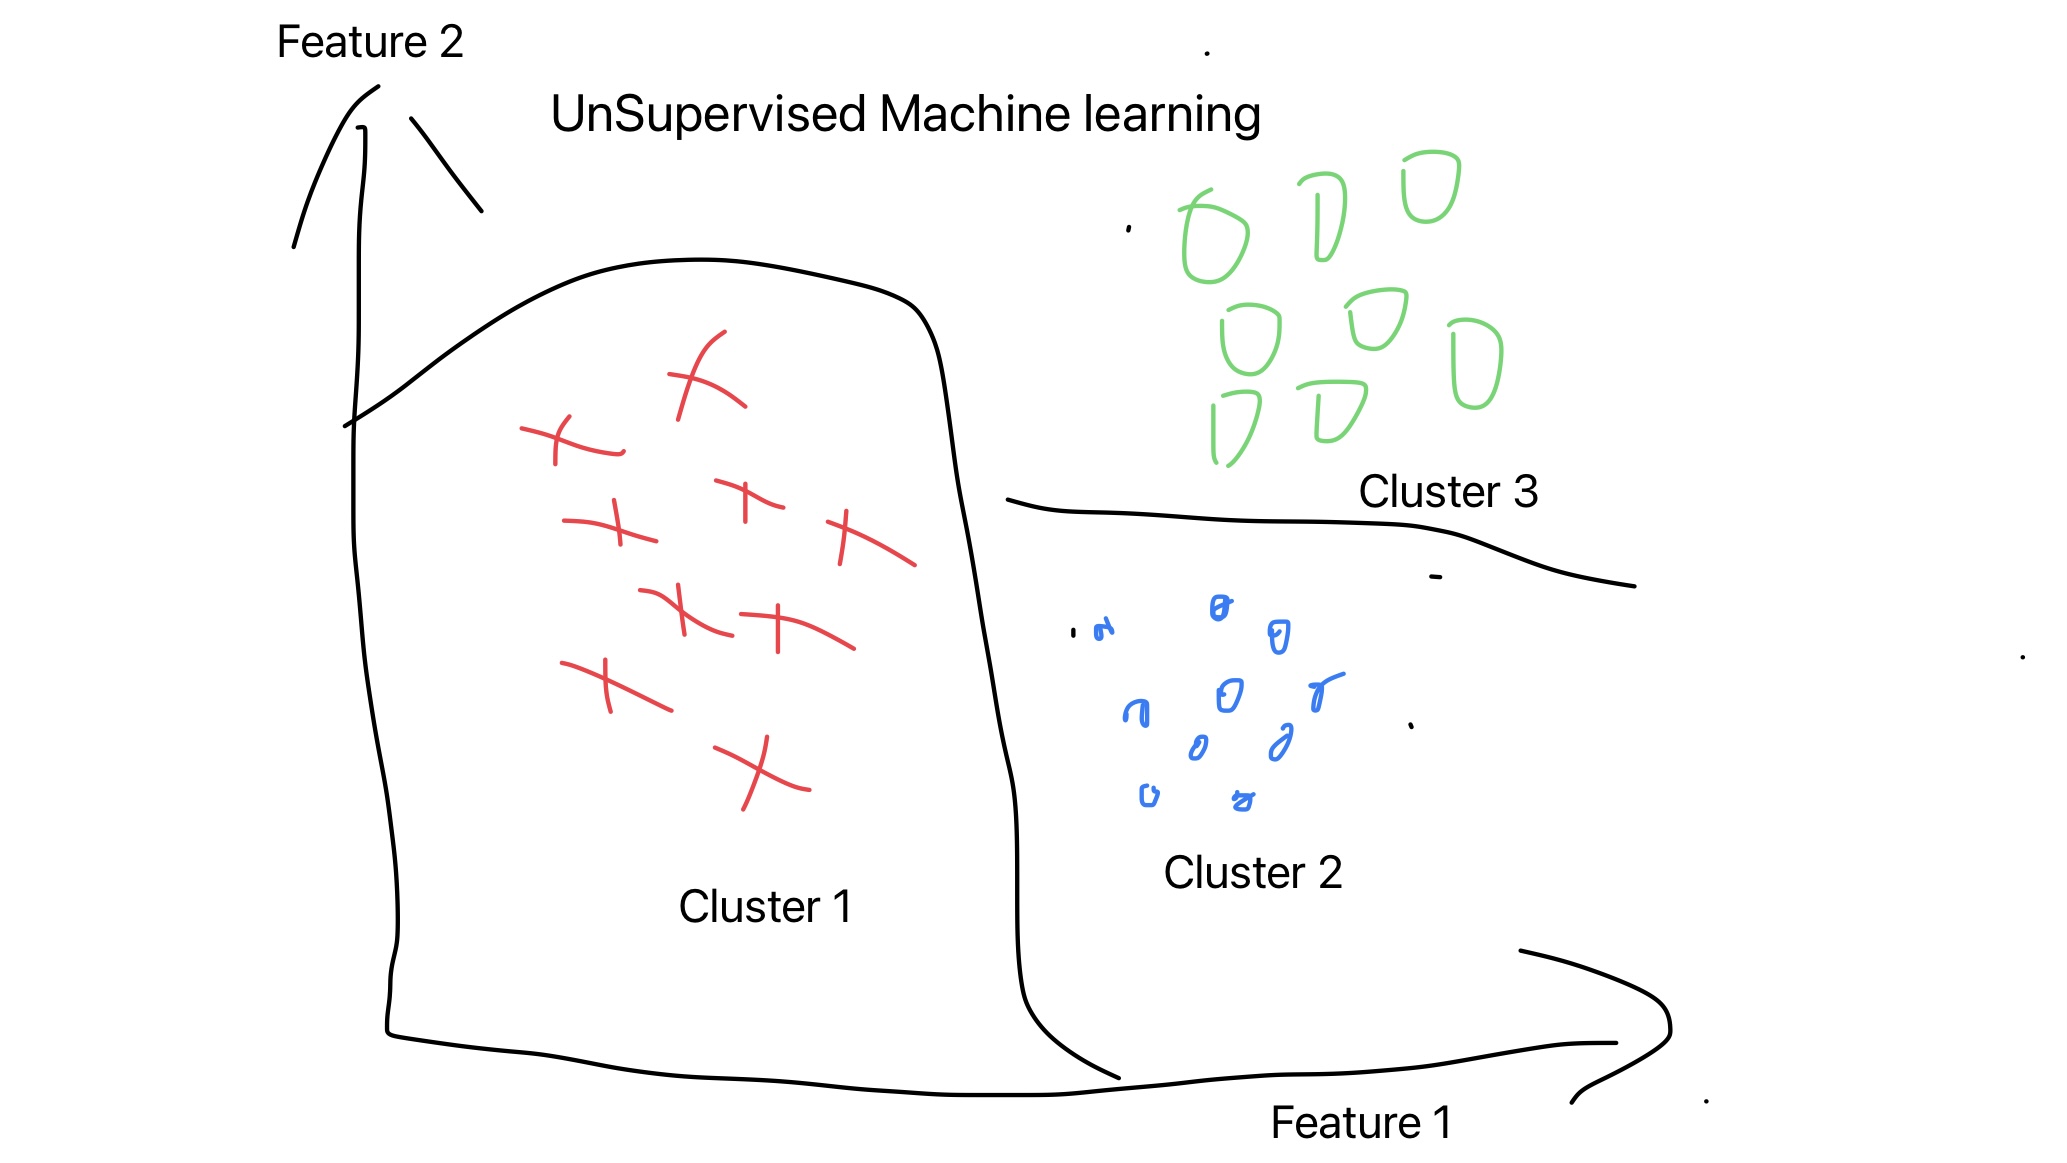 This image shows Unsupervised Machine Learning Representation